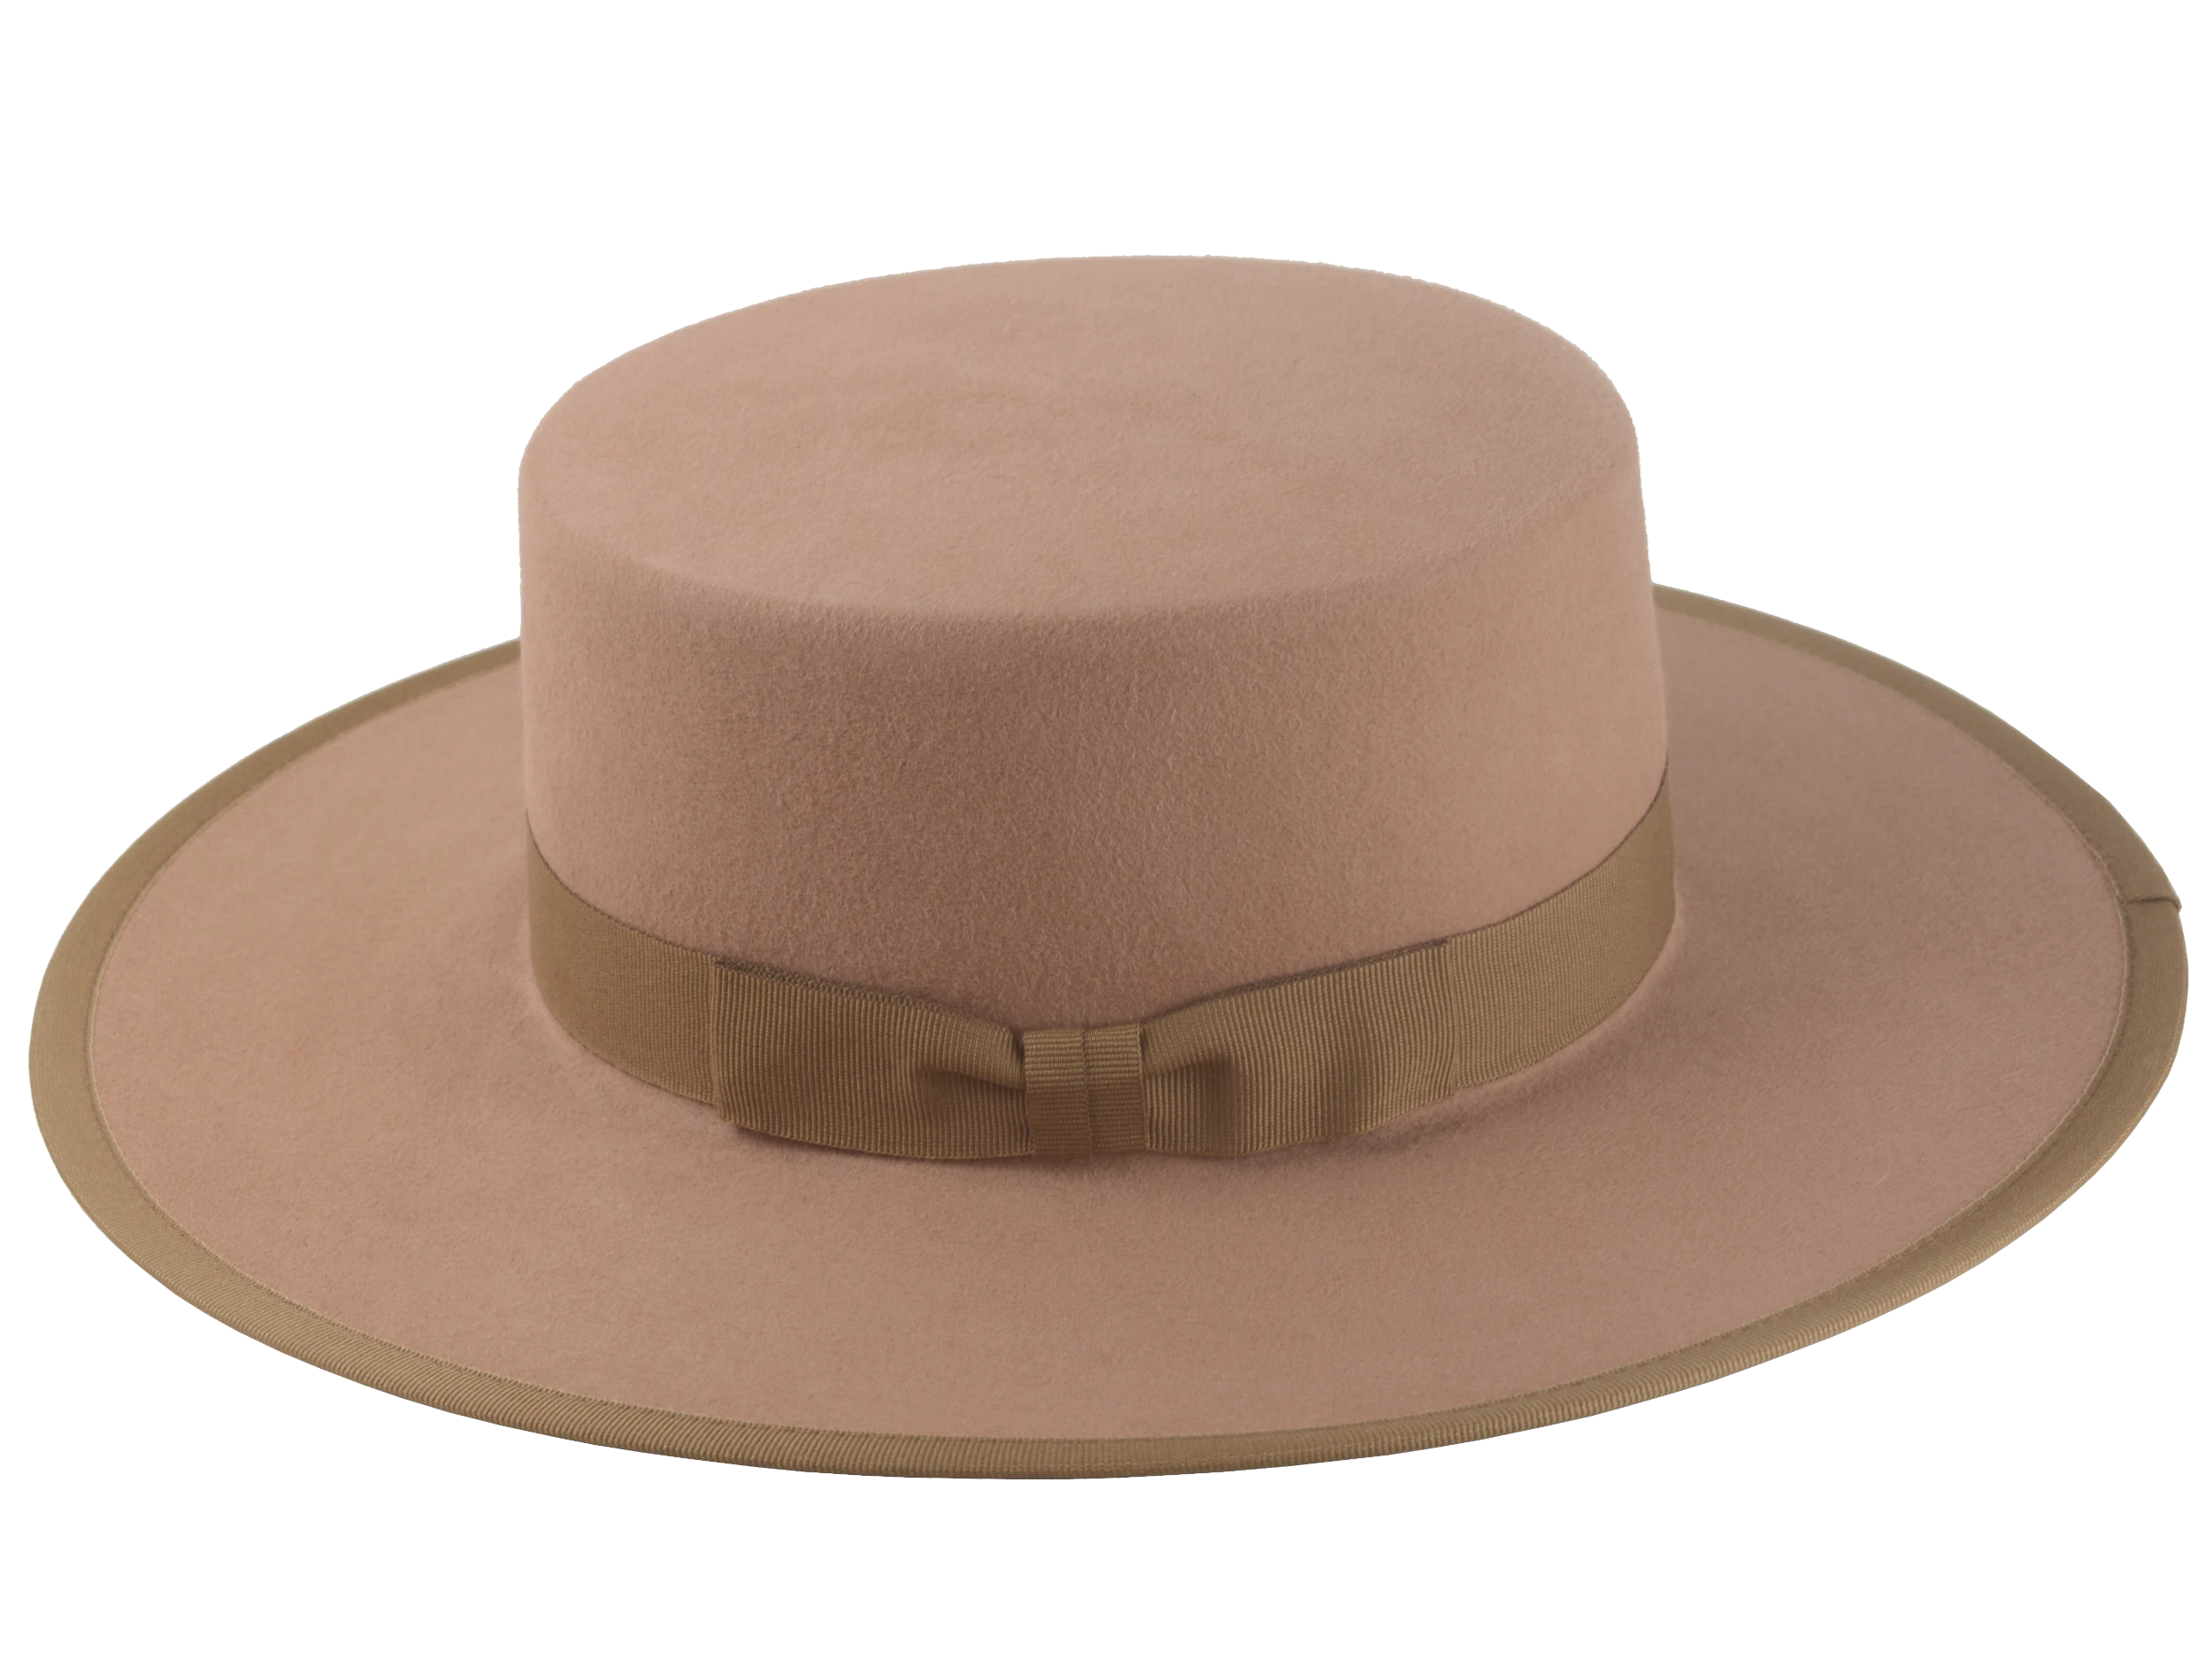 The Gaucho: Detailed focus on the 1 1/4" grosgrain ribbon hatband and stitch precision | Agnoulita Hats